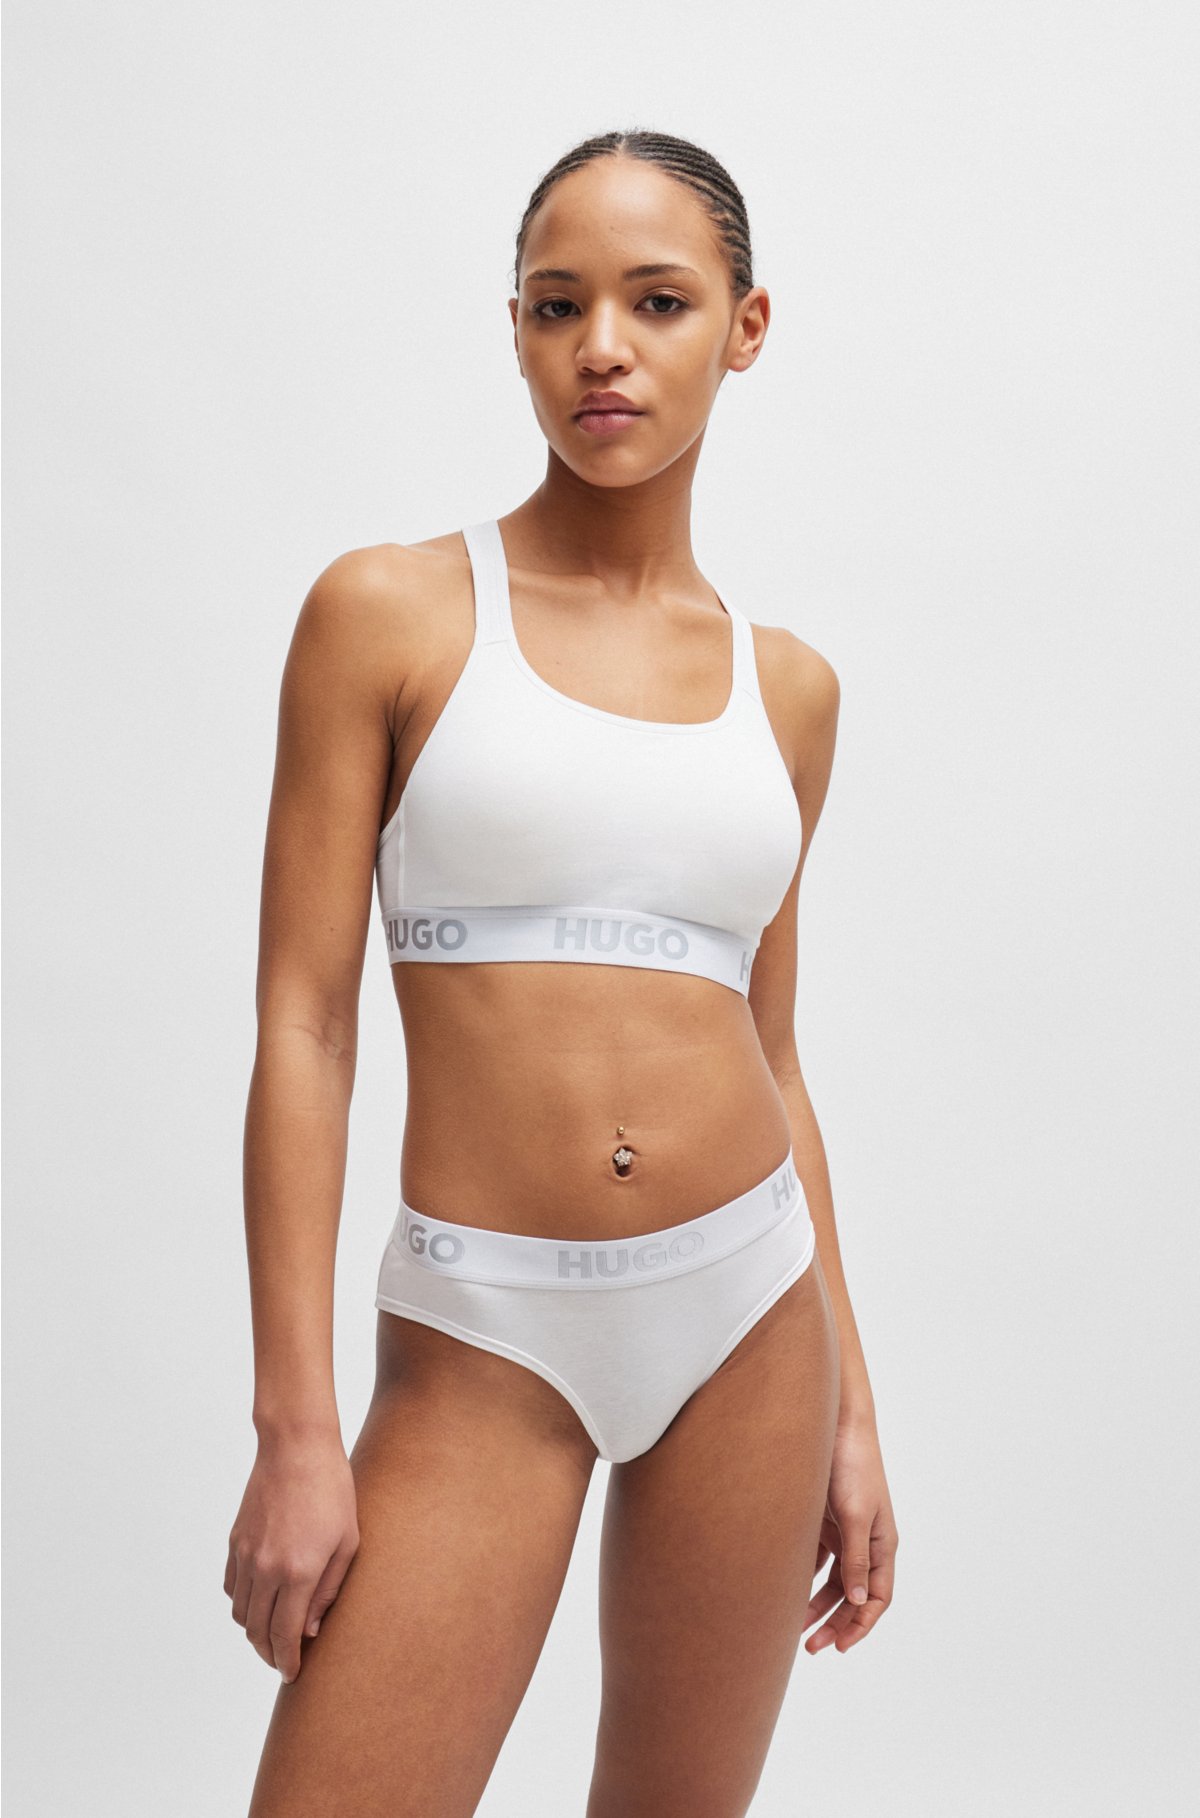 HUGO in bra stretch repeat - with logos Sports cotton